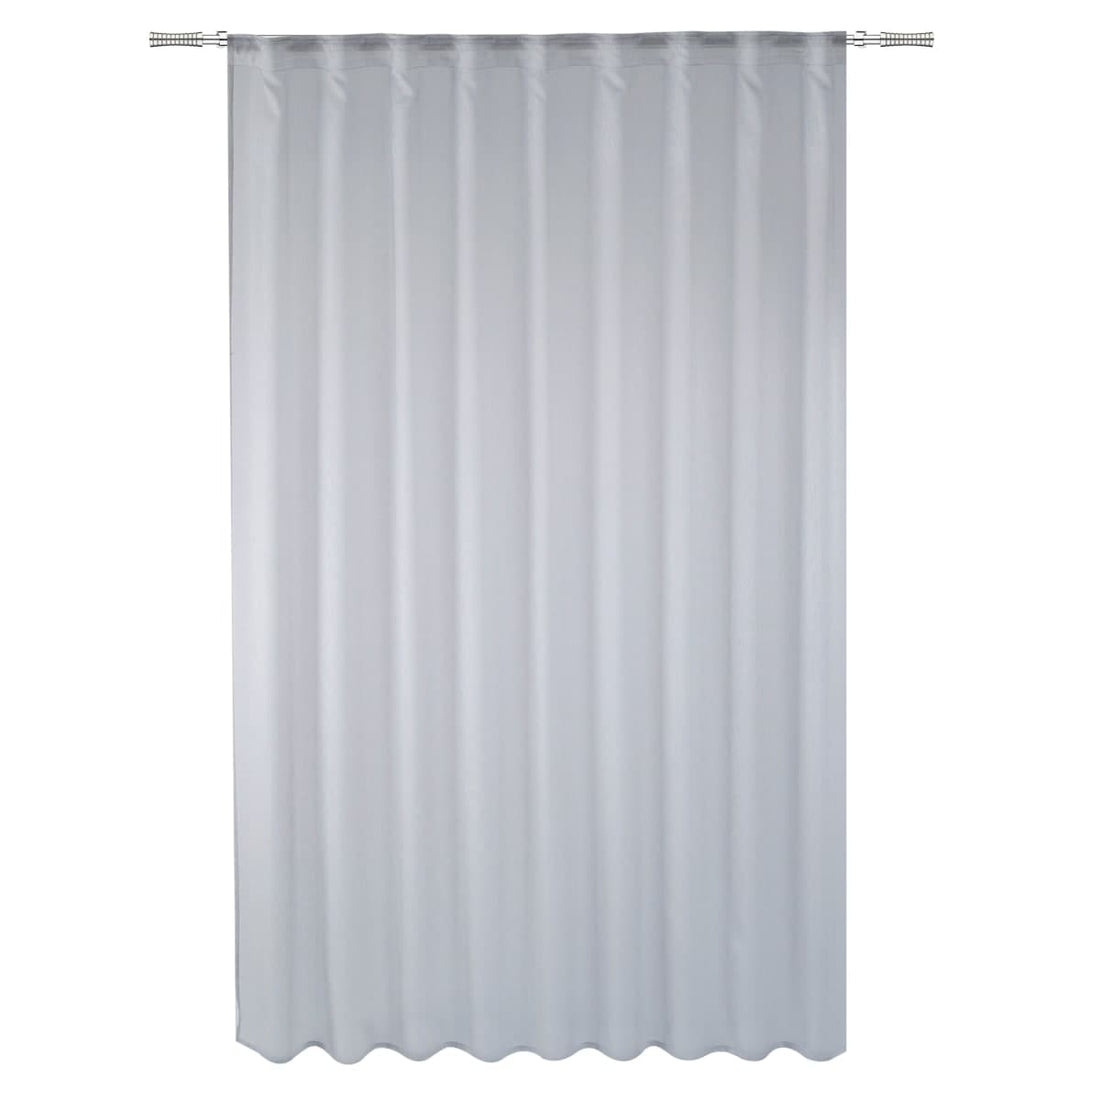 SOFTY GREY FILTER CURTAIN 200X280 CM WITH CONCEALED LOOP AND WEBBING - best price from Maltashopper.com BR480009476